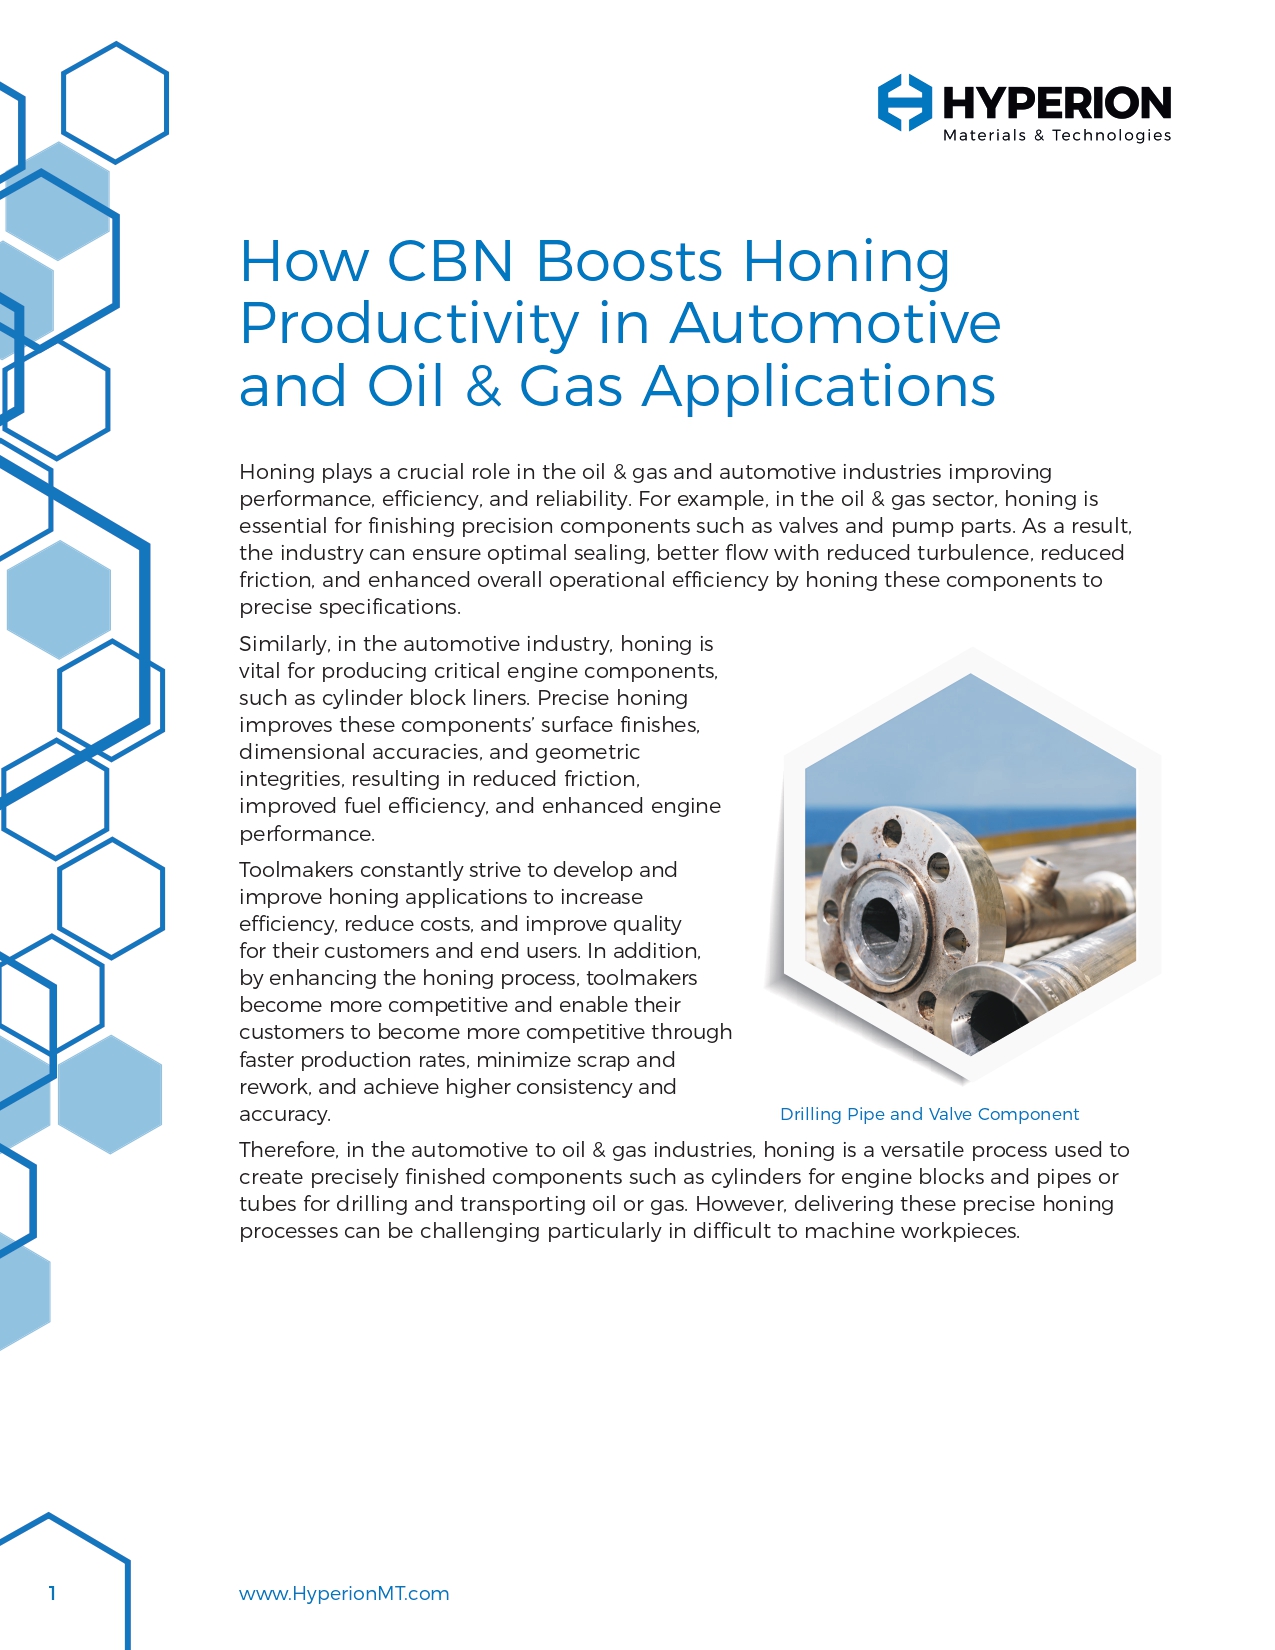 How CBN Boosts Honing Productivity in Automotive and Oil & Gas Applications